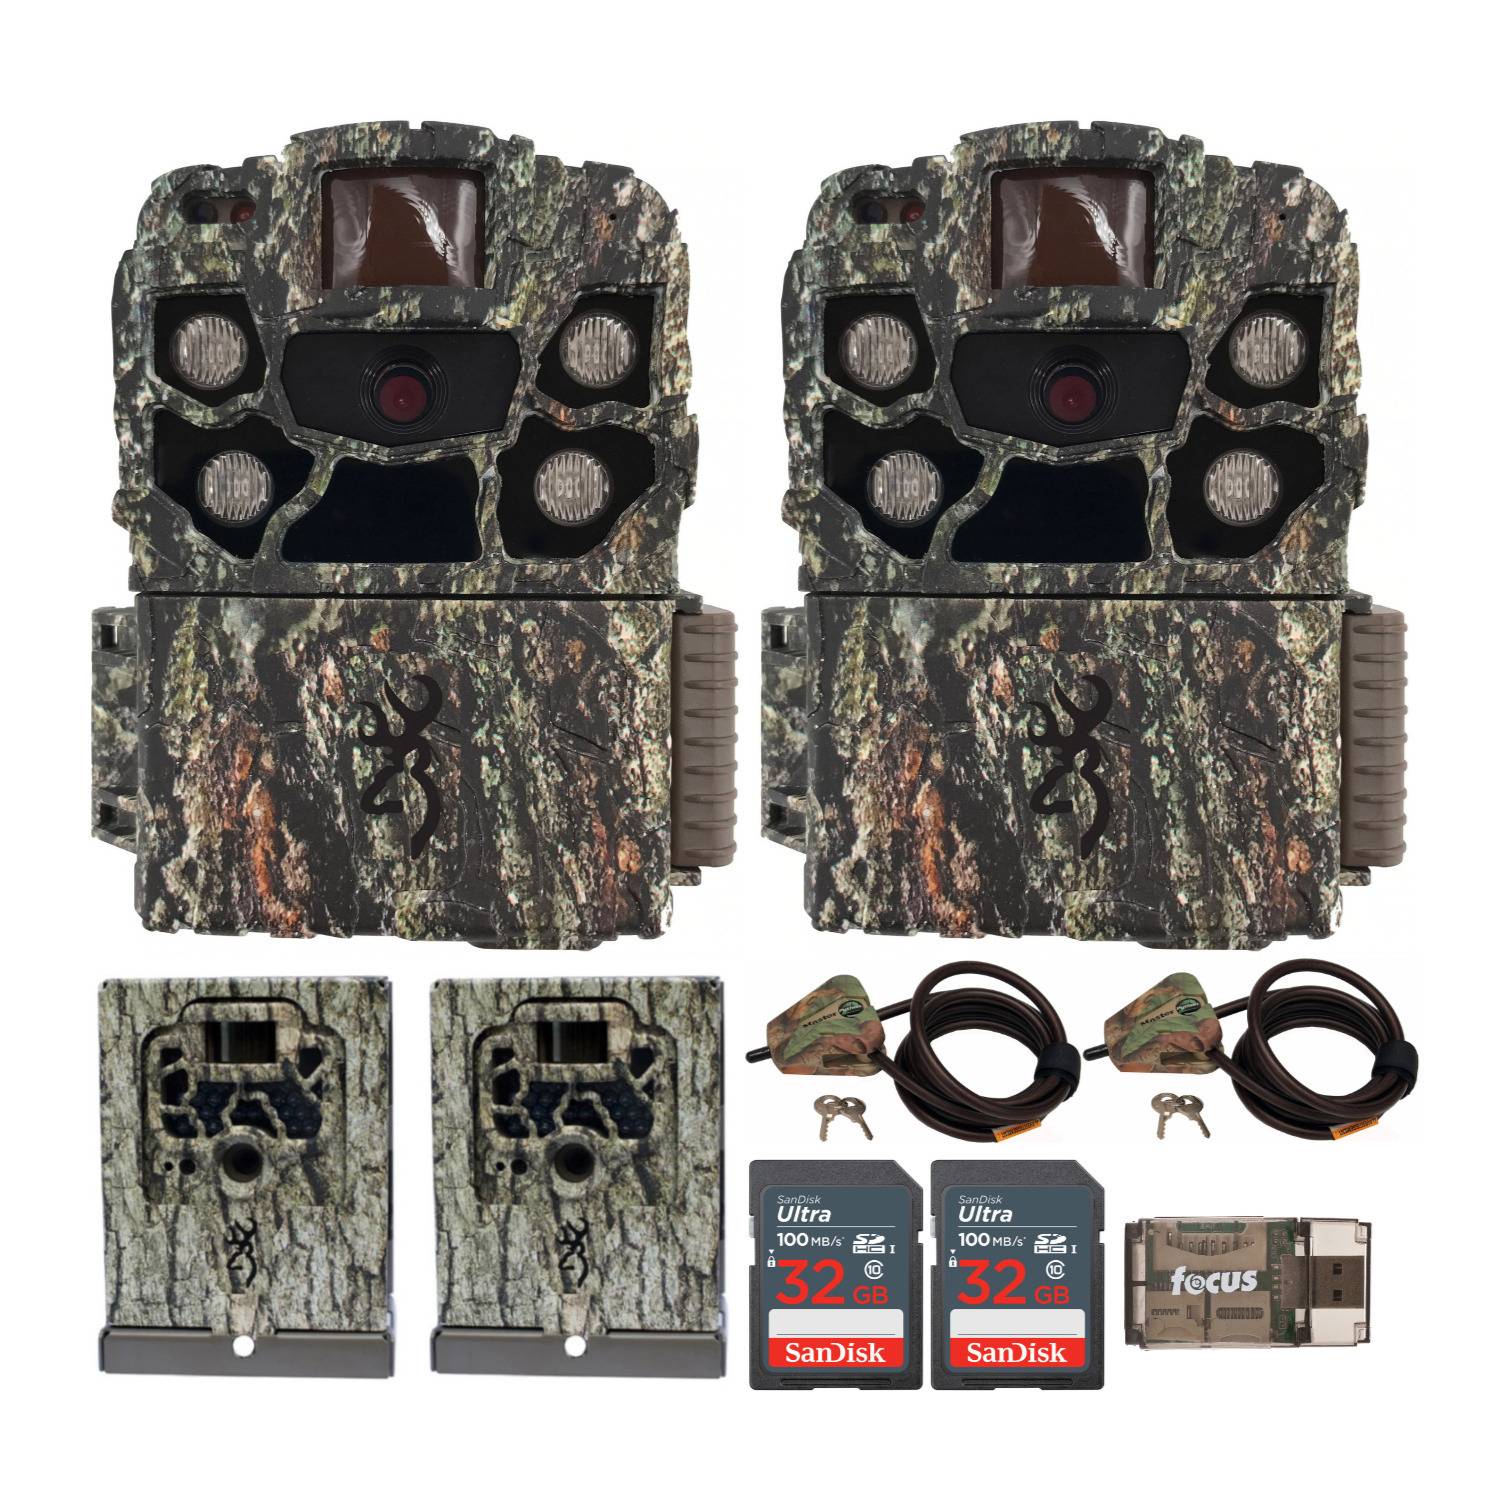 Browning Strike Force Full HD Trail Camera with Security Box and Locking Cable Bundle (2-Pack)